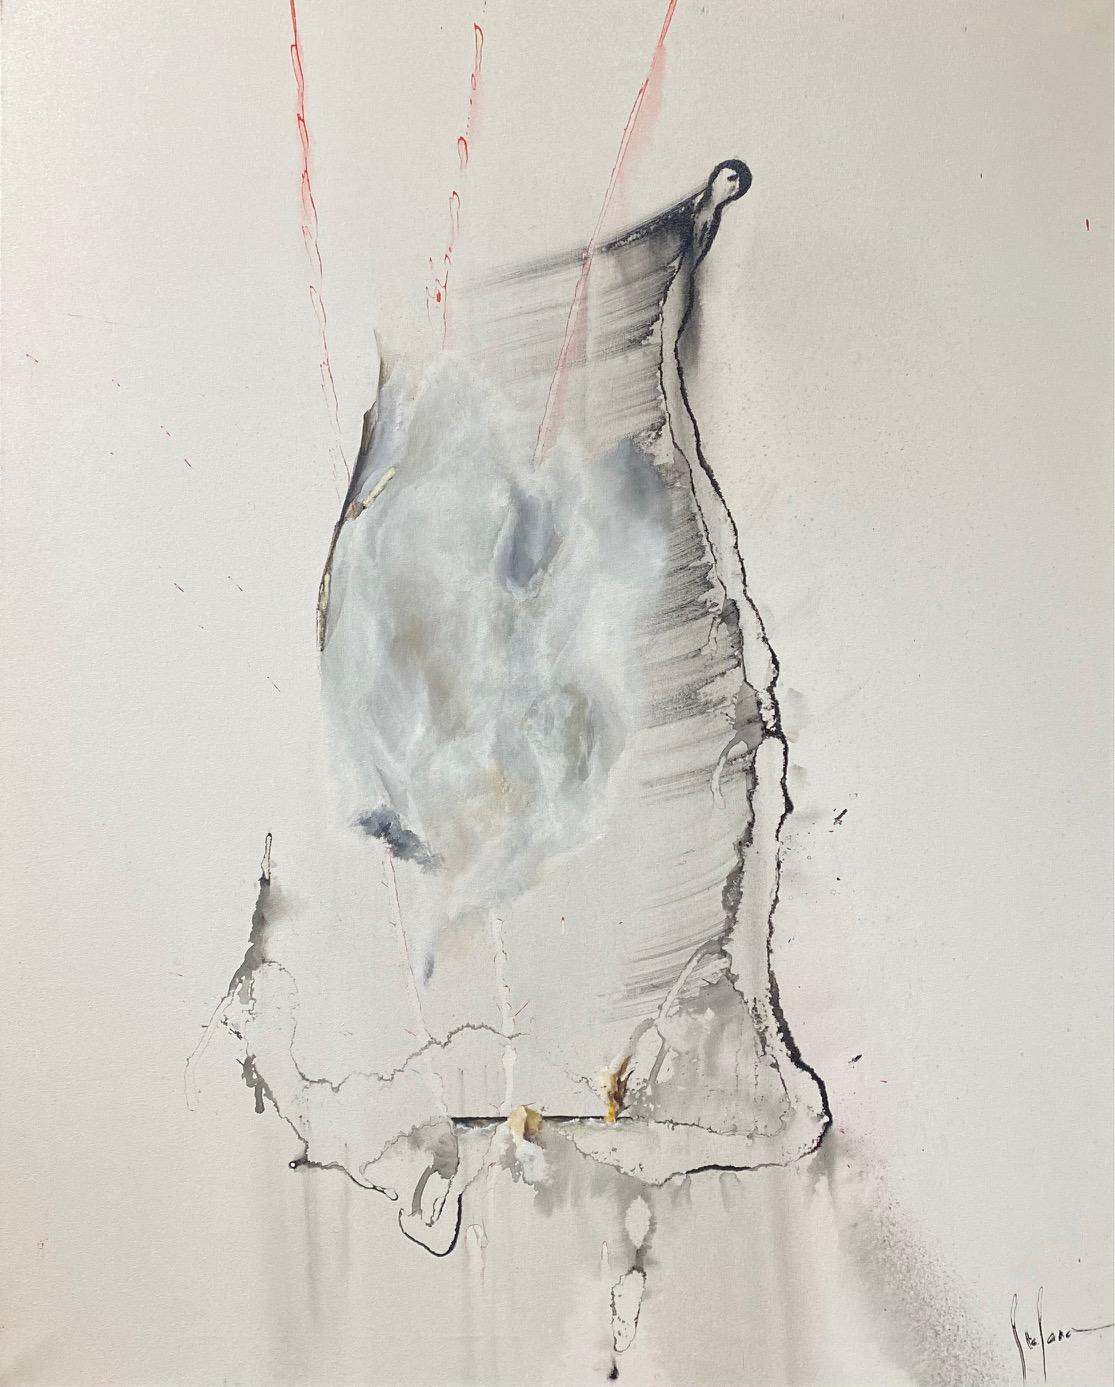 Stefano is a contemporary painter from Geneva who plays with the abstract and a suggested figurative. This piece represents for the artist "what we see under women's skirts". It was painted in 2019 and was part of a series of three pieces, the other